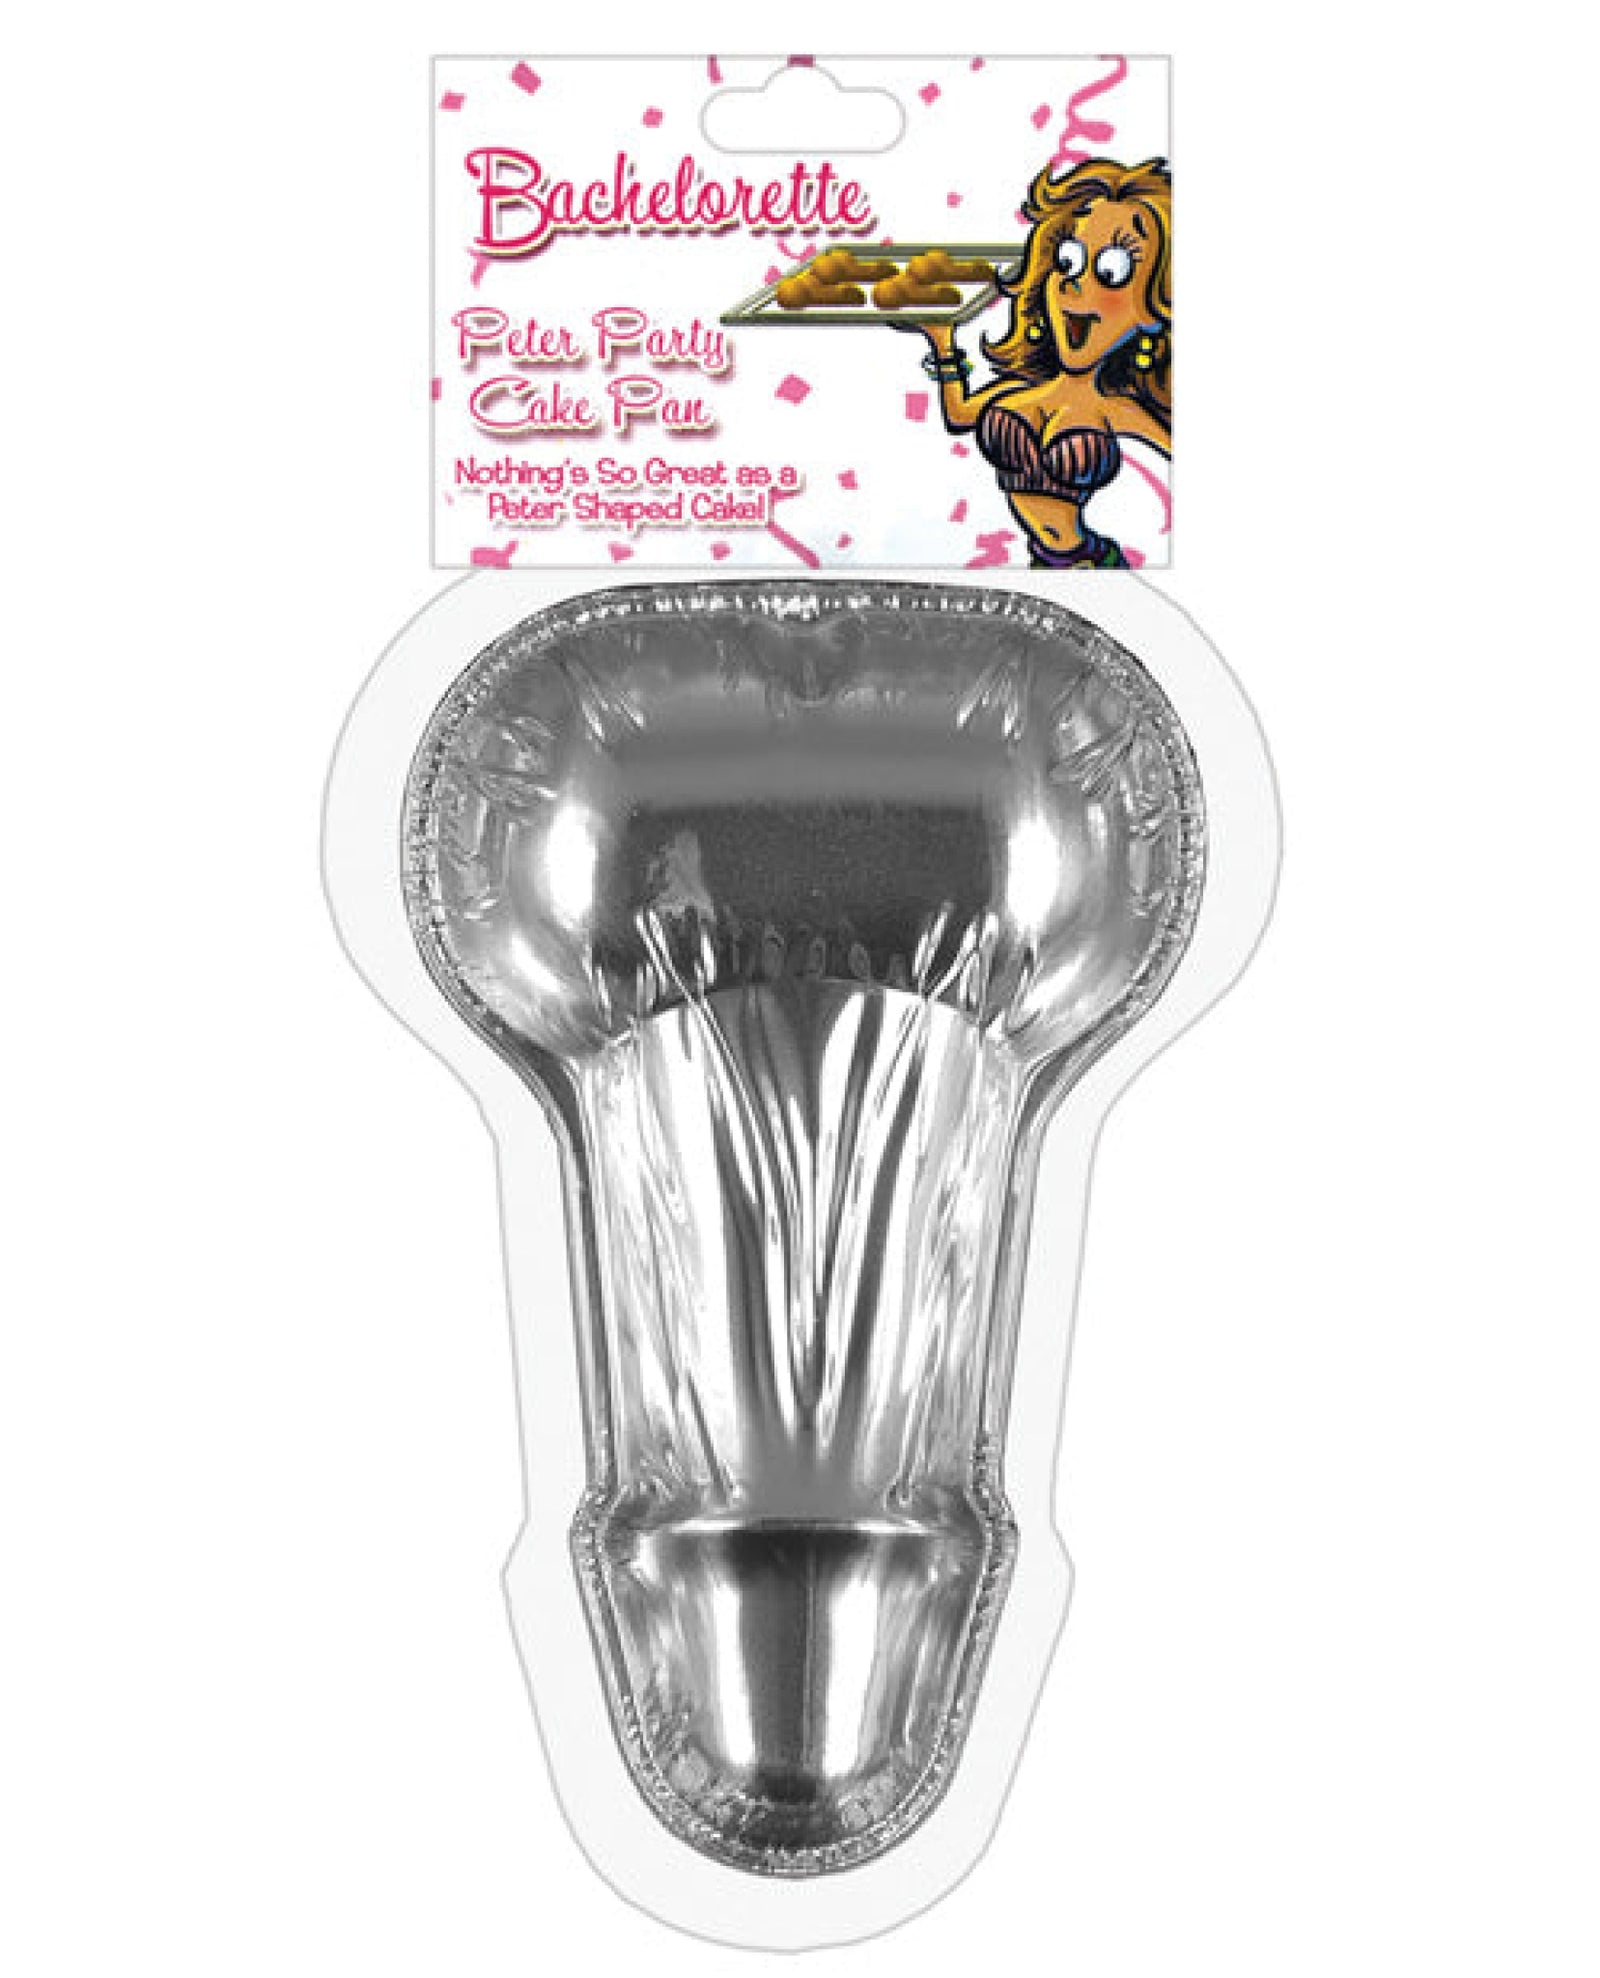 Bachelorette Disposable Peter Party Cake Pan Small - Pack Of 6 Hott Products